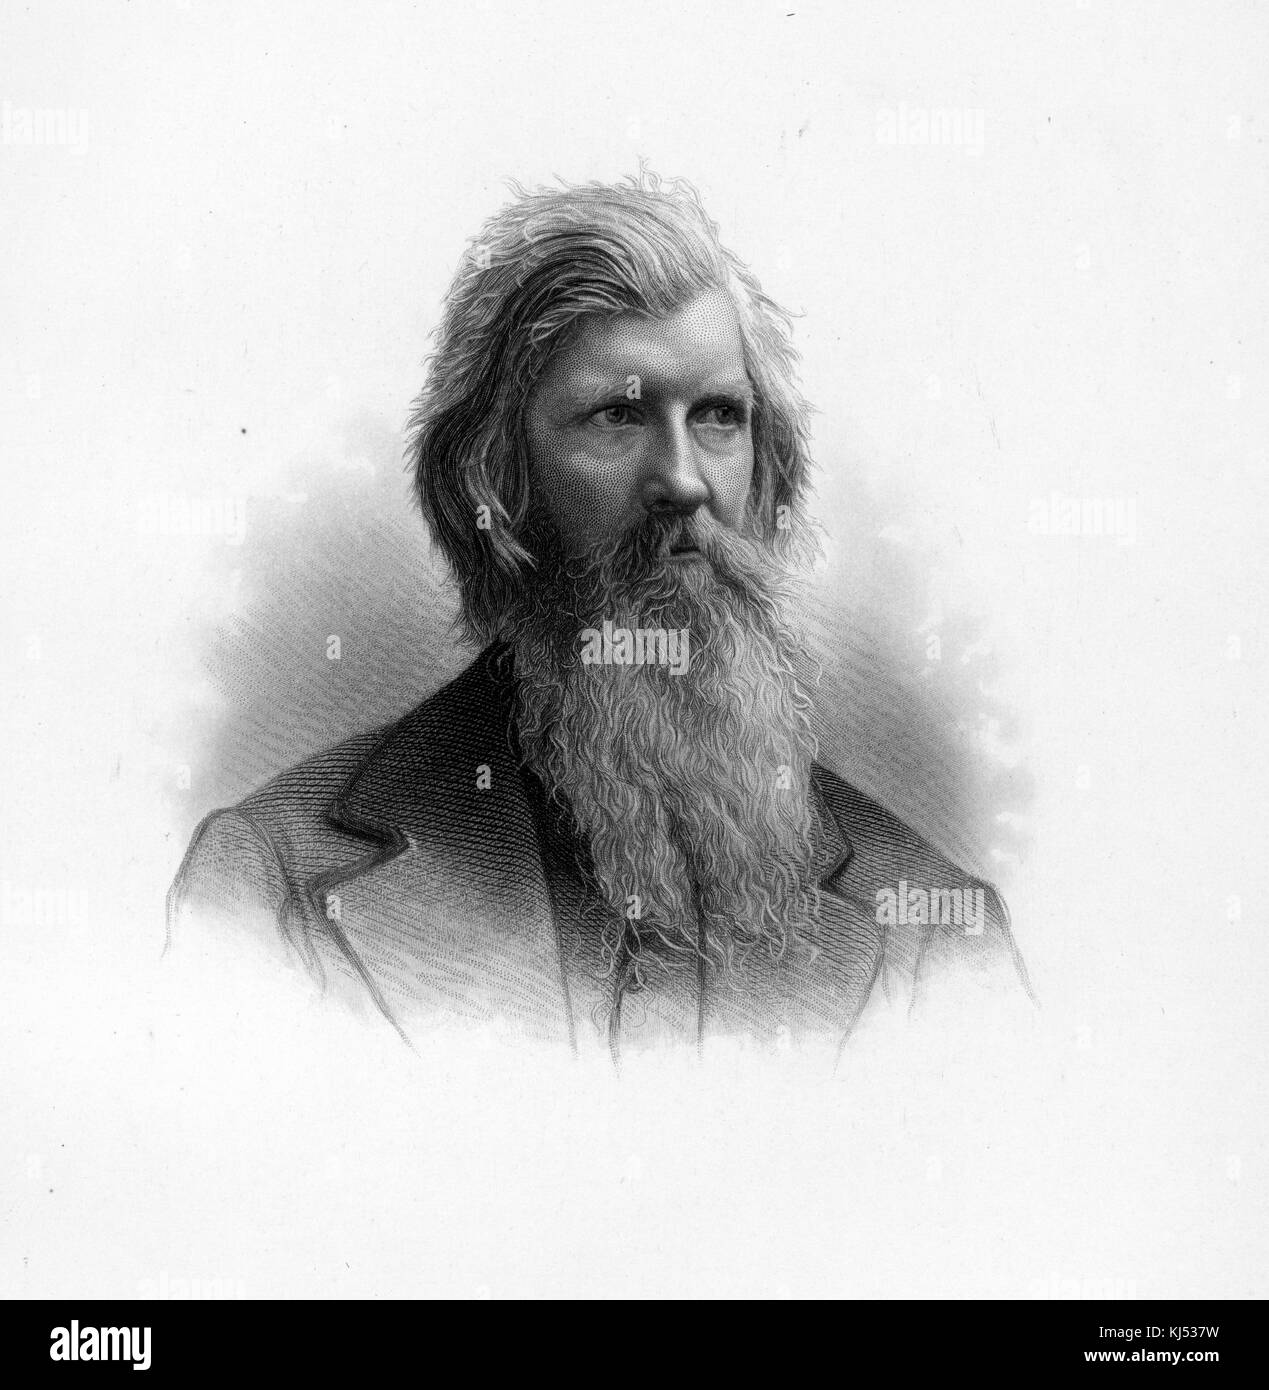 An engraving from a portrait of Henry B Dawson, he was a writer, editor and publisher who engaged in politics and attracted controversy for his positions, 1881. From the New York Public Library. Stock Photo